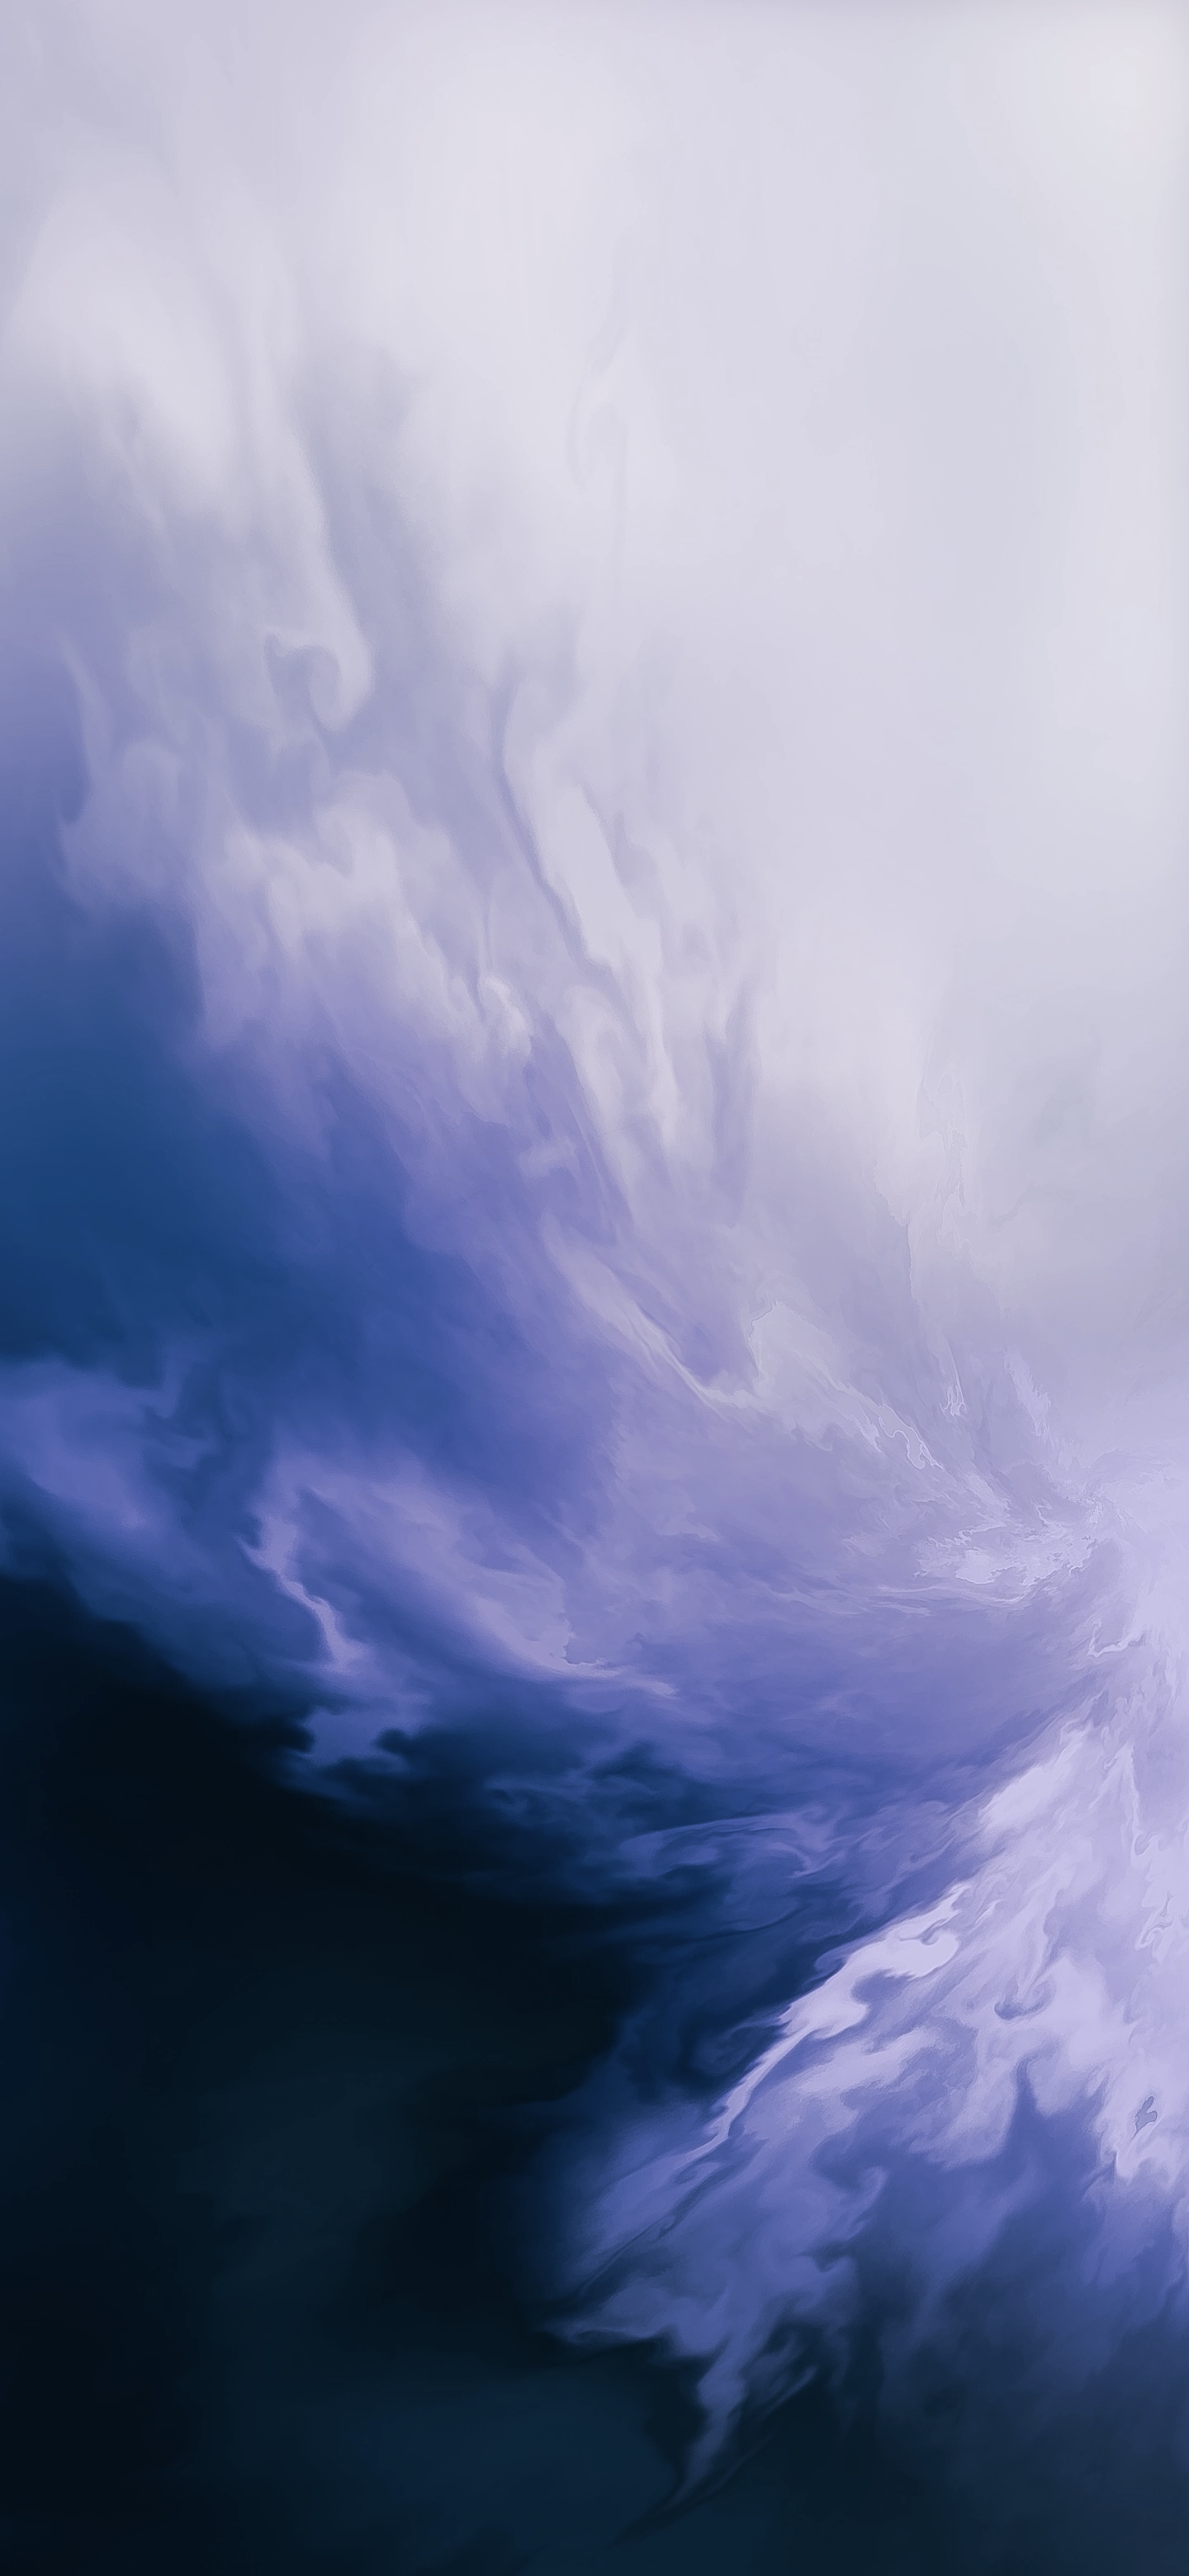 Oneplus 7T Pro Wallpapers